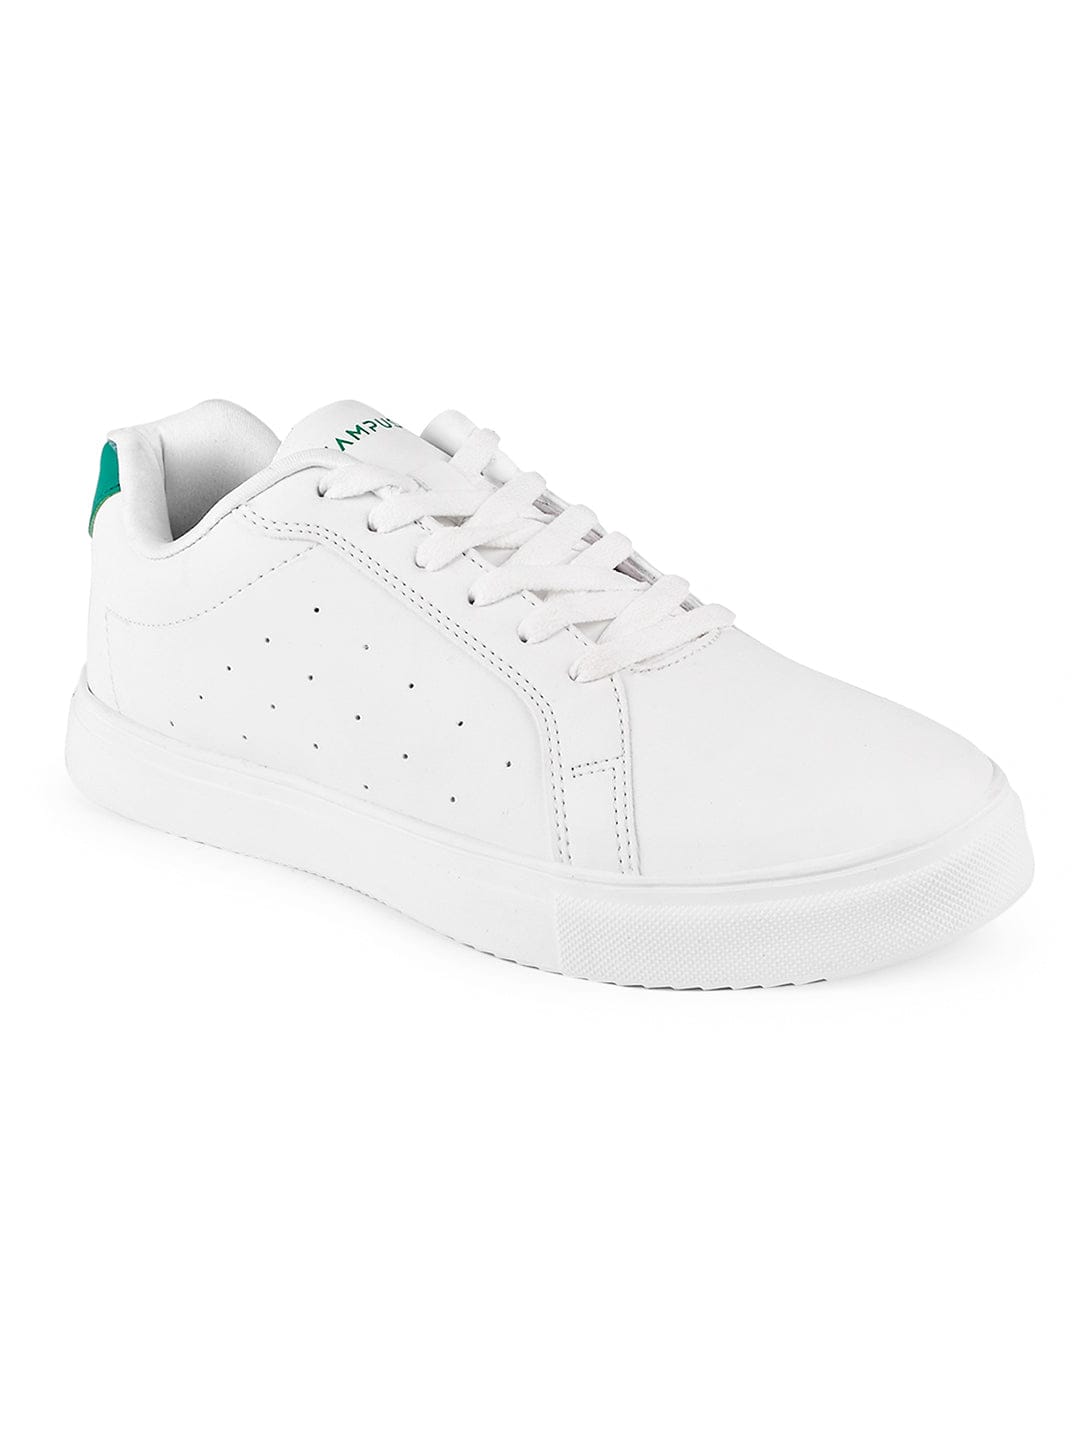 White coloured Sports sneakers shoes for girls | Casual shoes, Casual shoes  women, Girly shoes